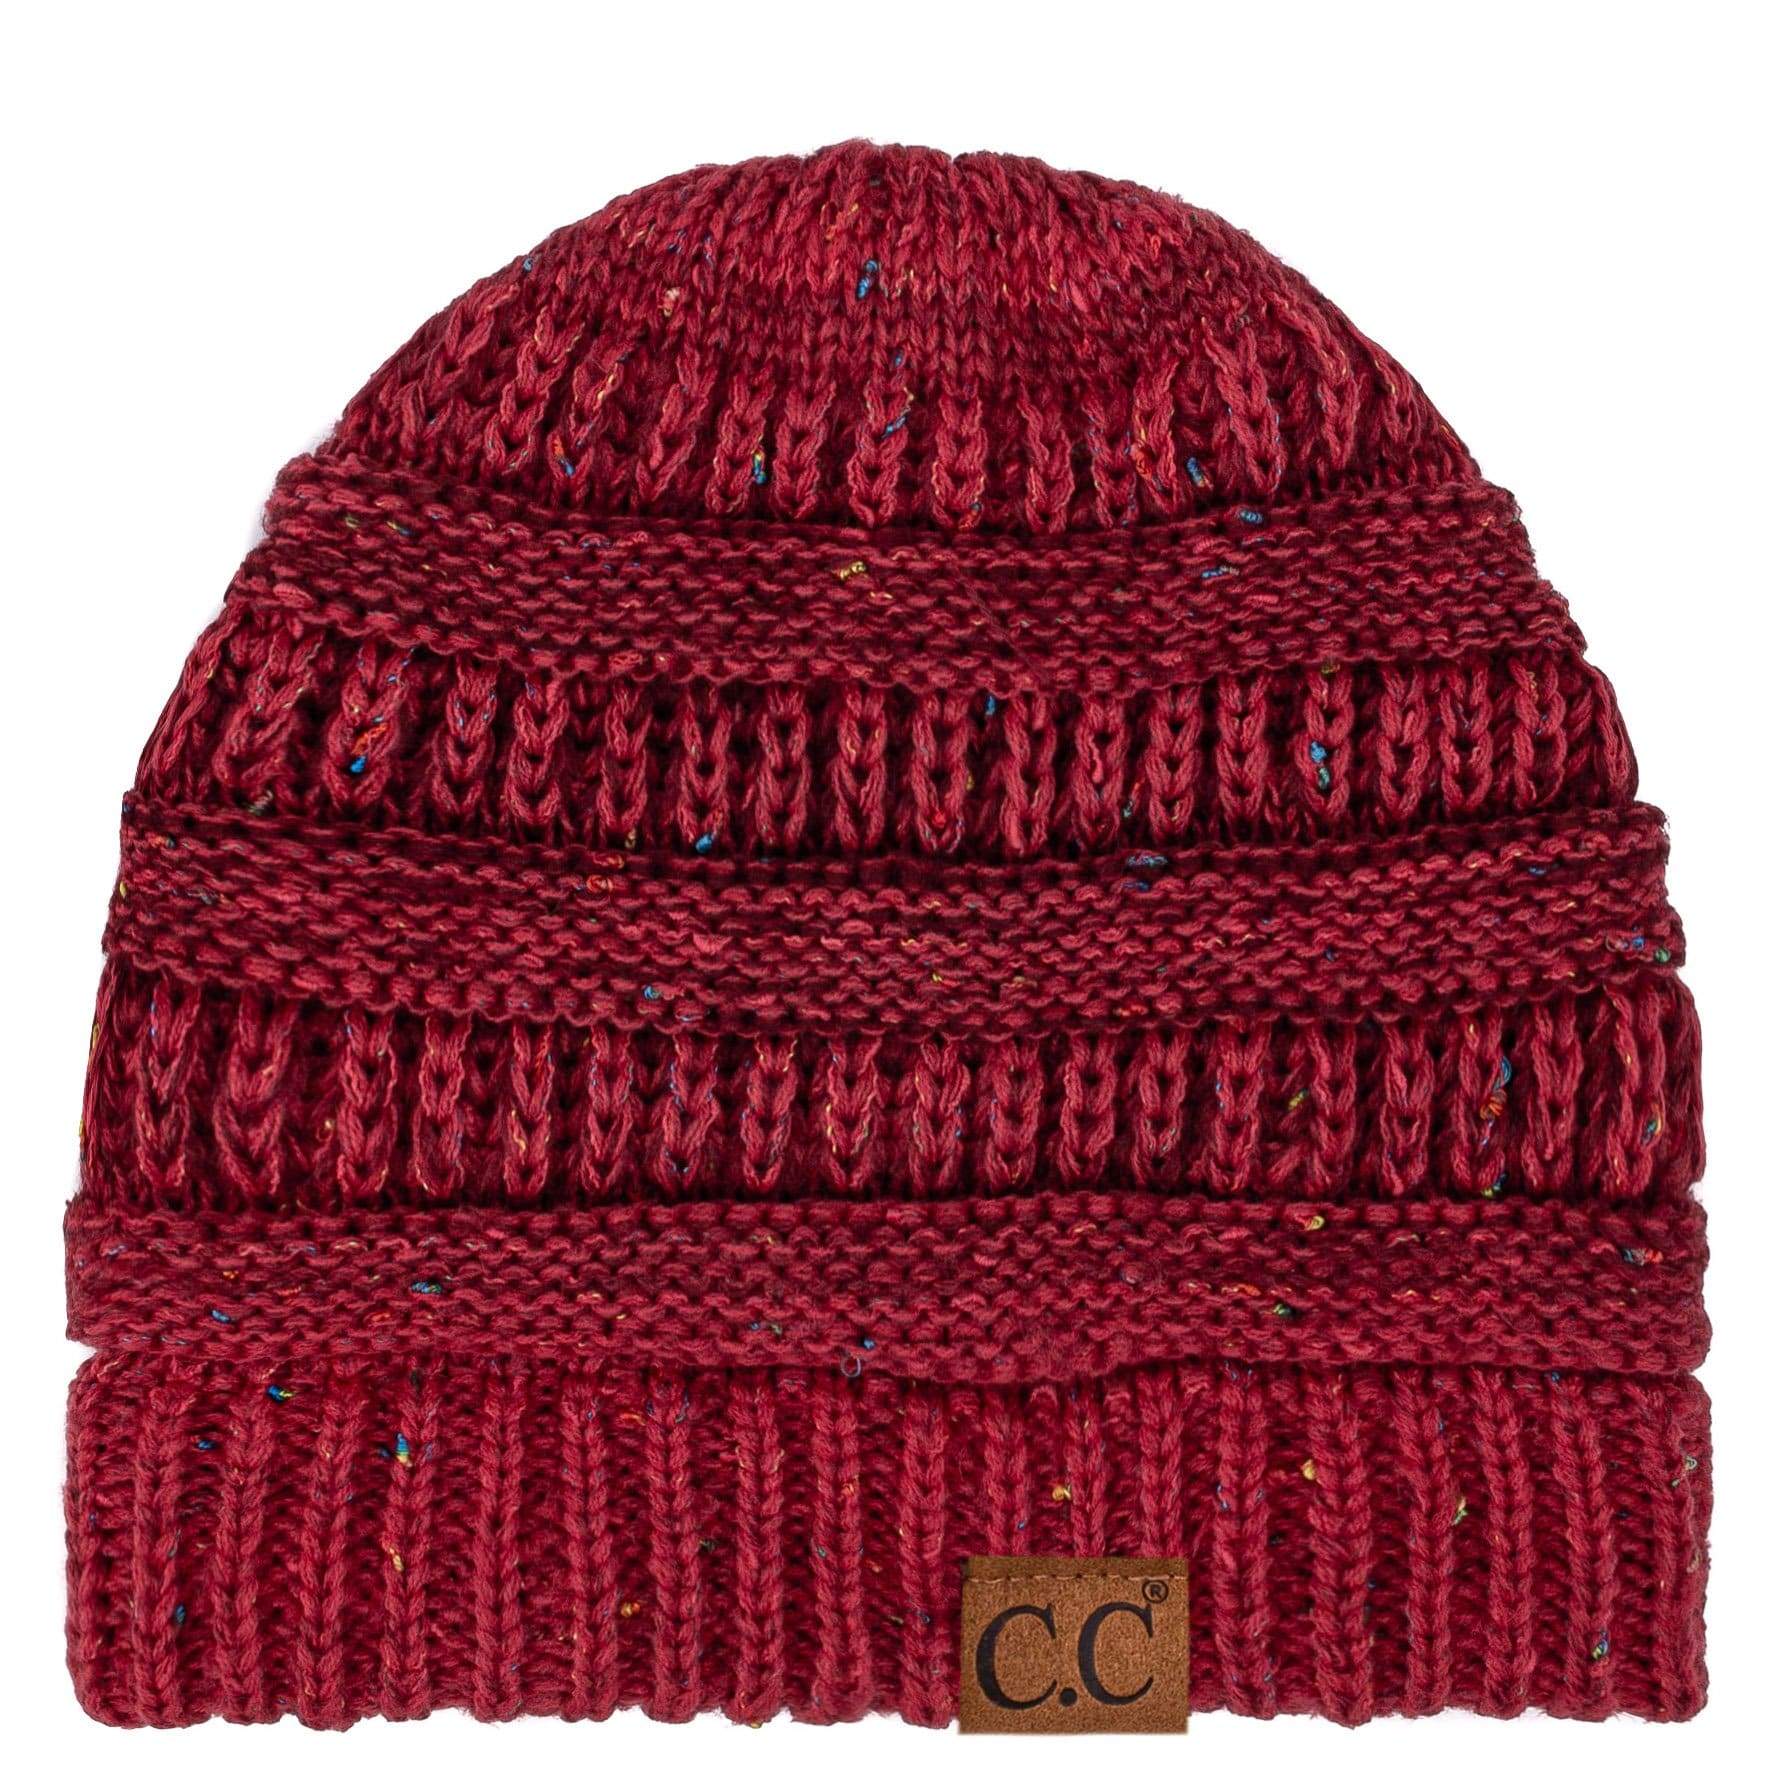 C.C Apparel Ombre Red C.C Trendy Warm Chunky Soft Stretch Ombre Cable Knit Beanie Skully